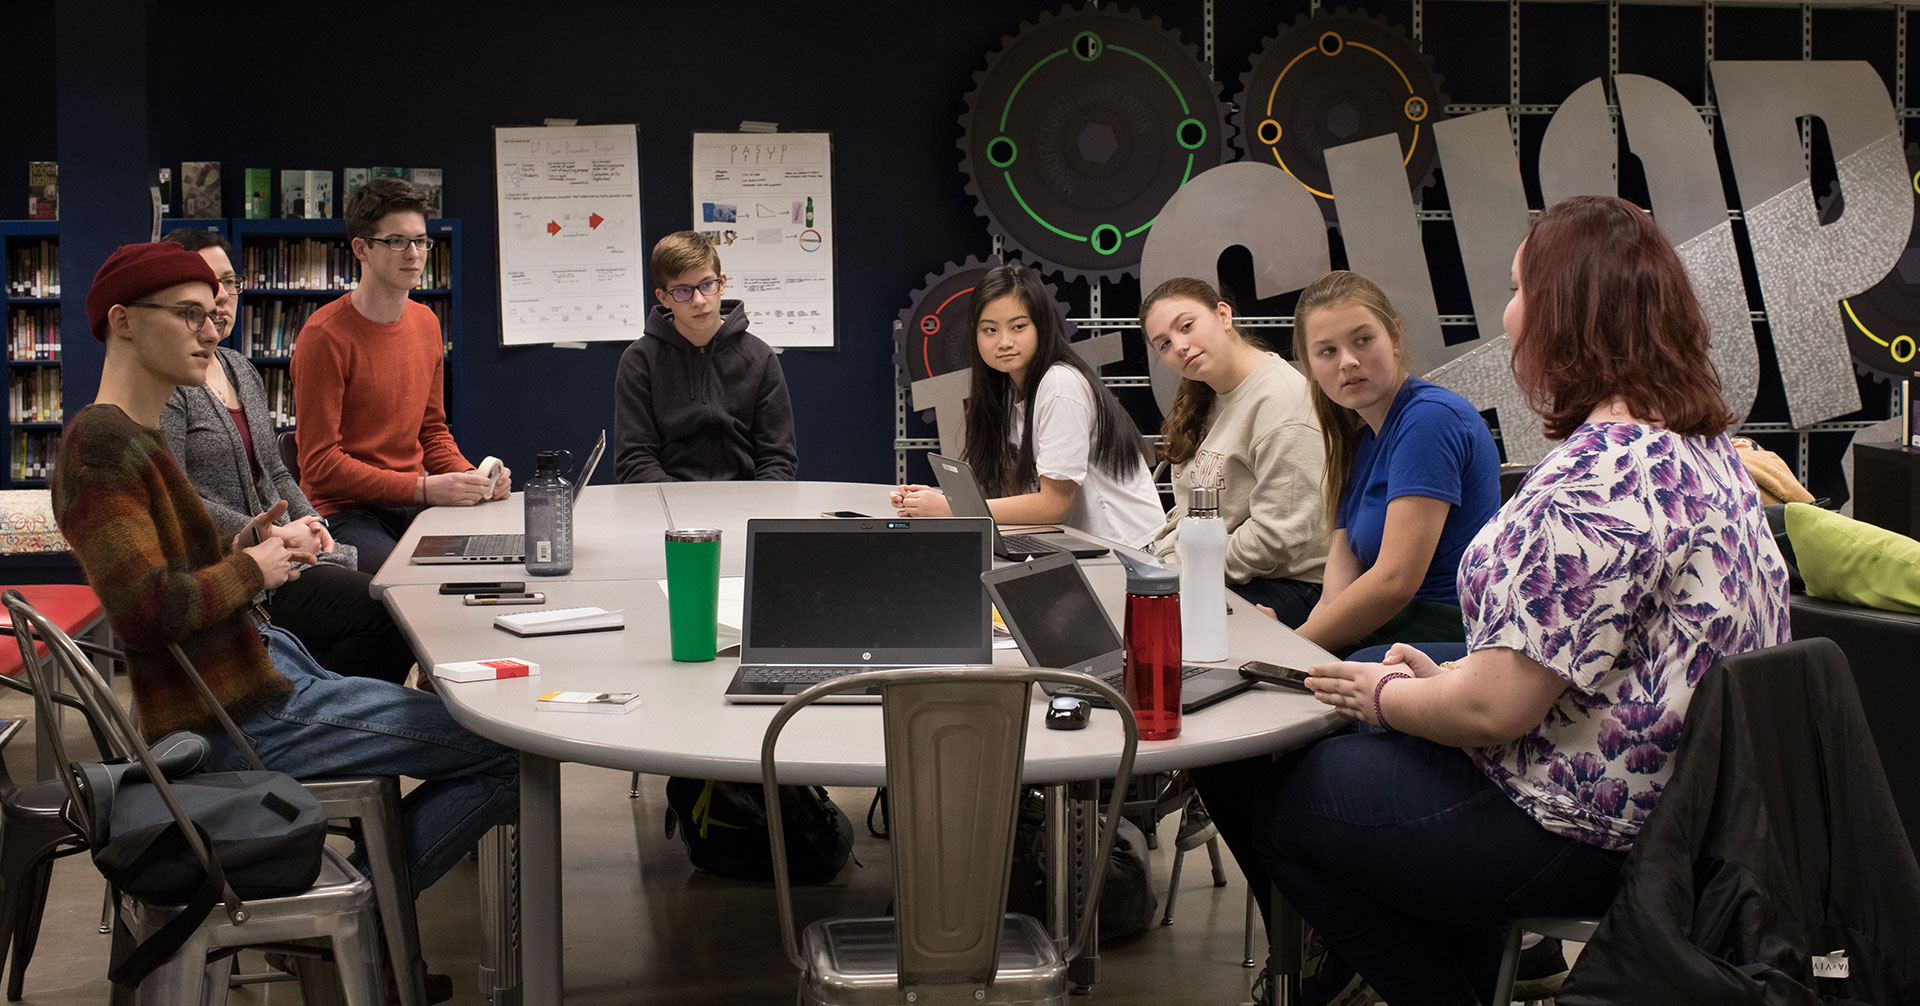 Students at Carlynton brainstorm solutions to UN Sustainable Development Goals. / Photo by Nico Segall Tobon